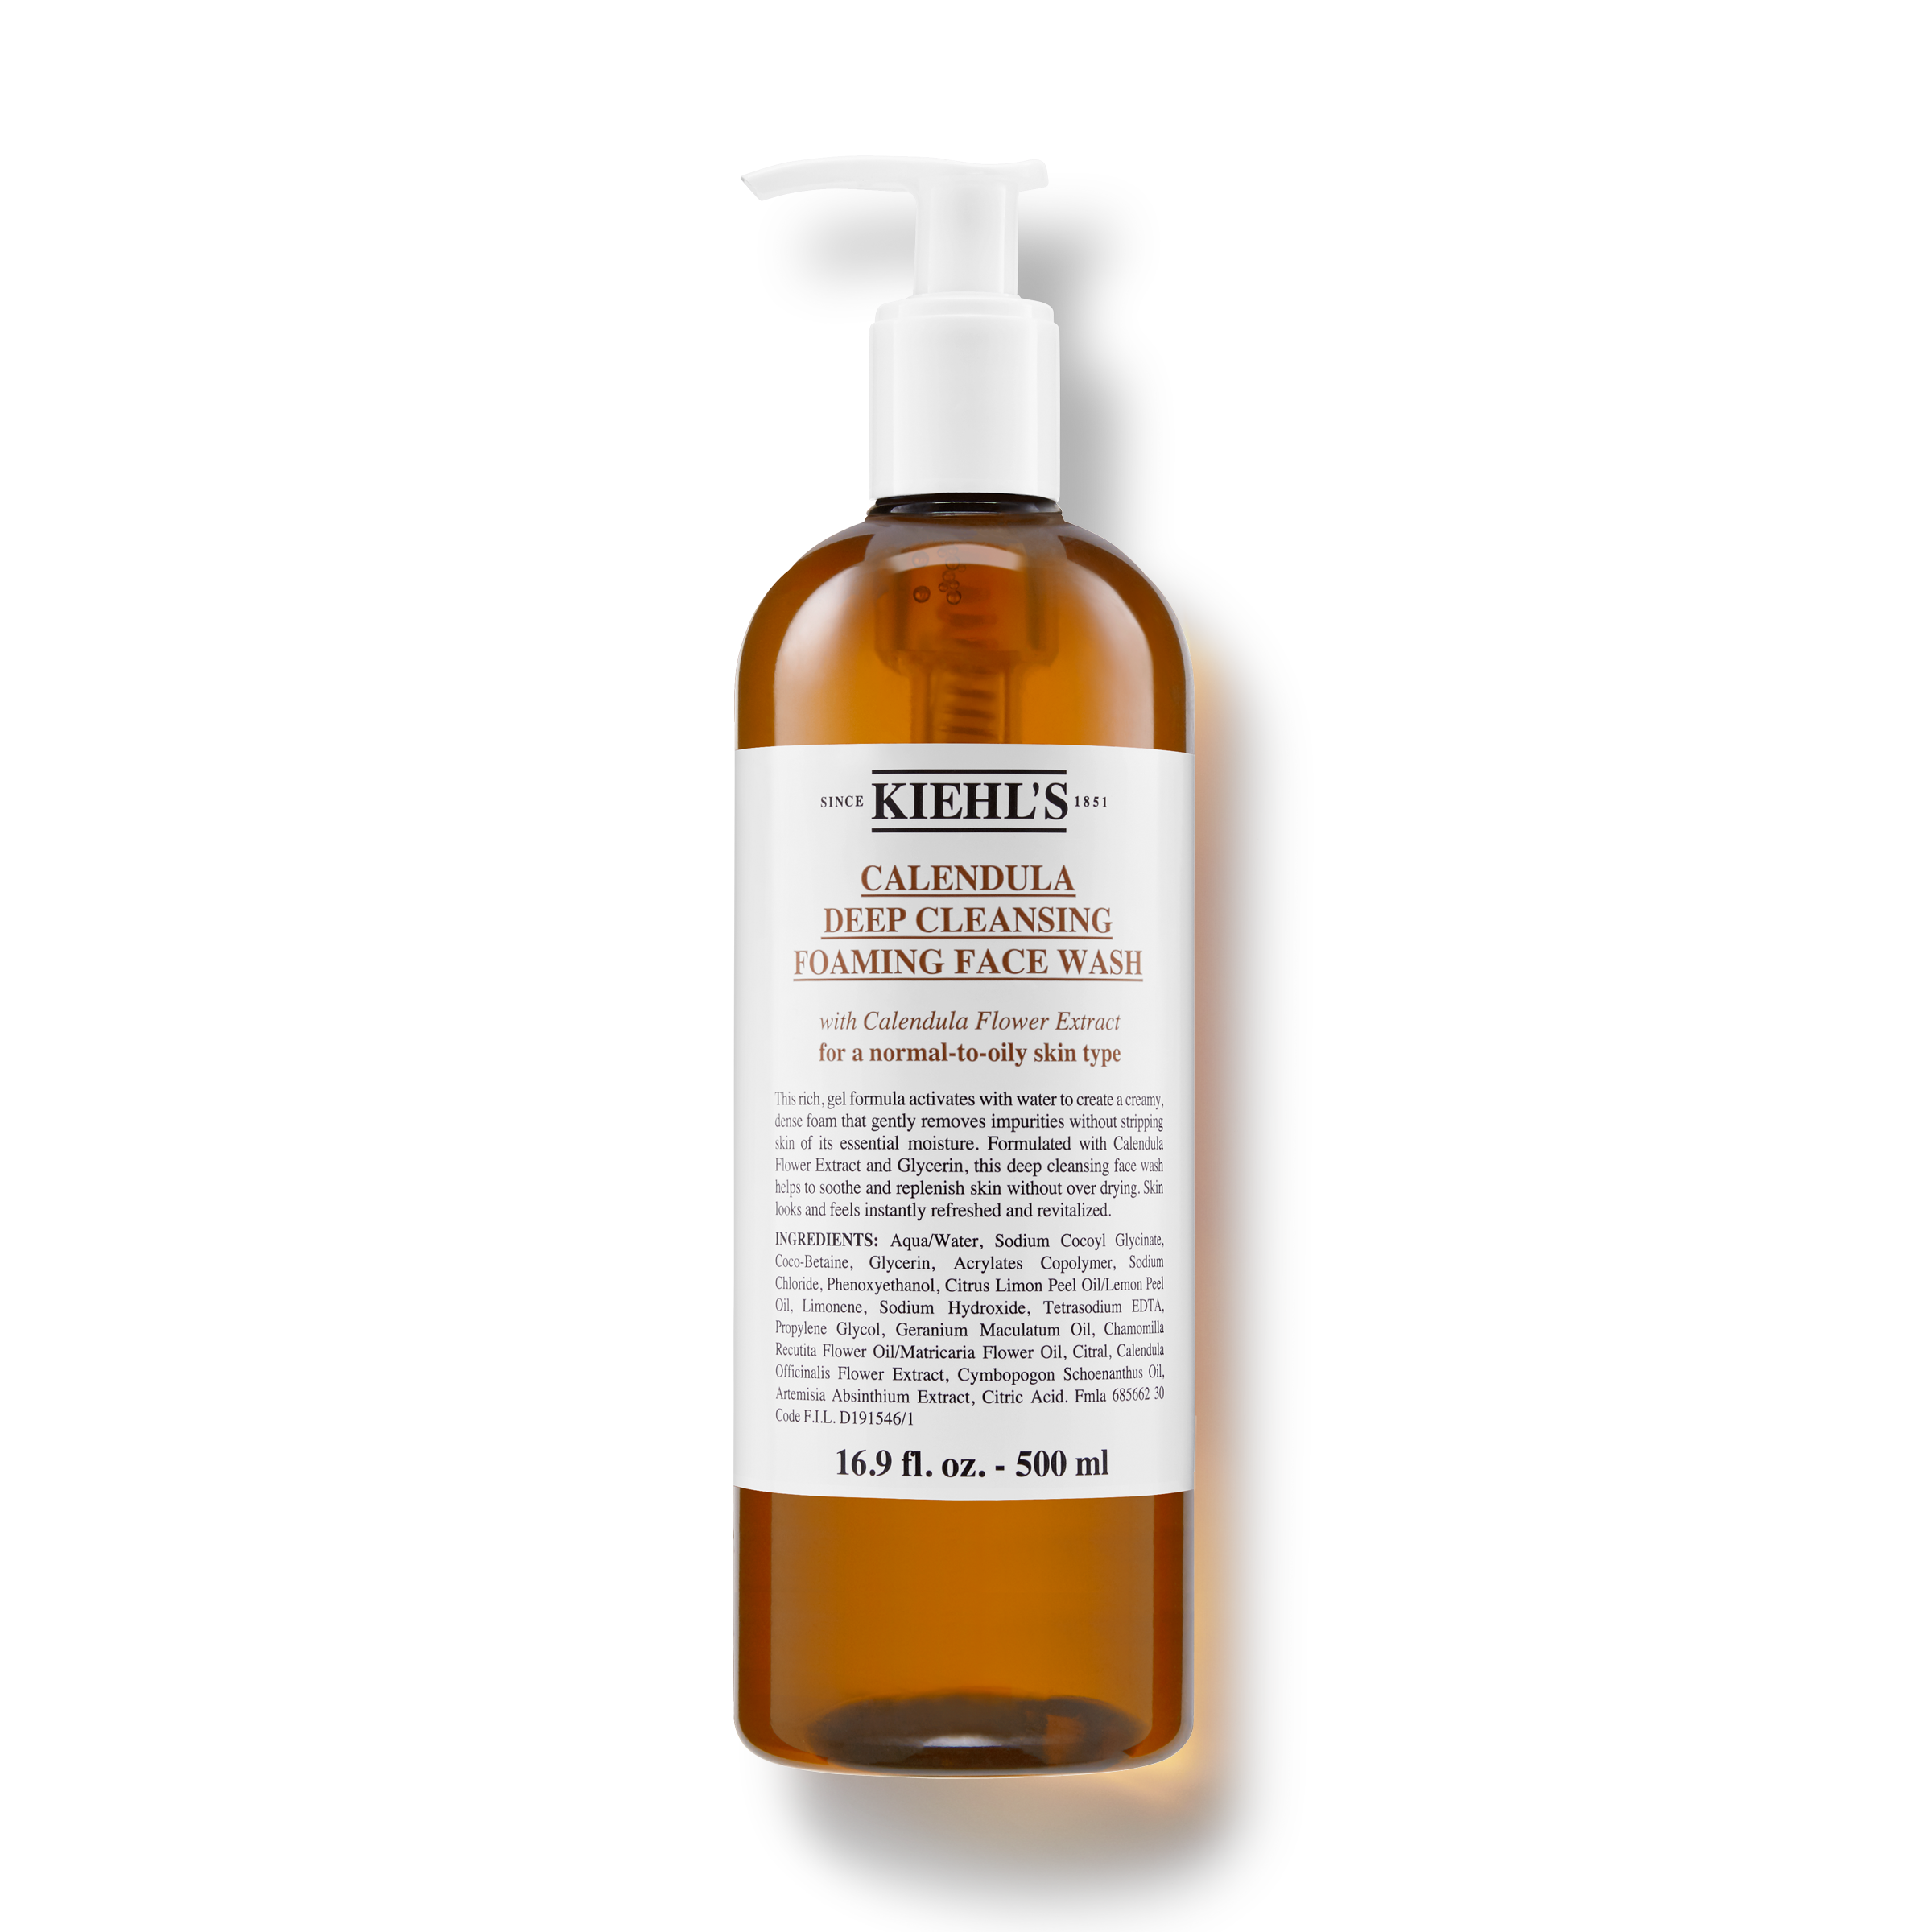 kiehls-face-cleanser-calendula-deep-cleansing-foaming-face-wash-500ml-000-3605970879730-front.png